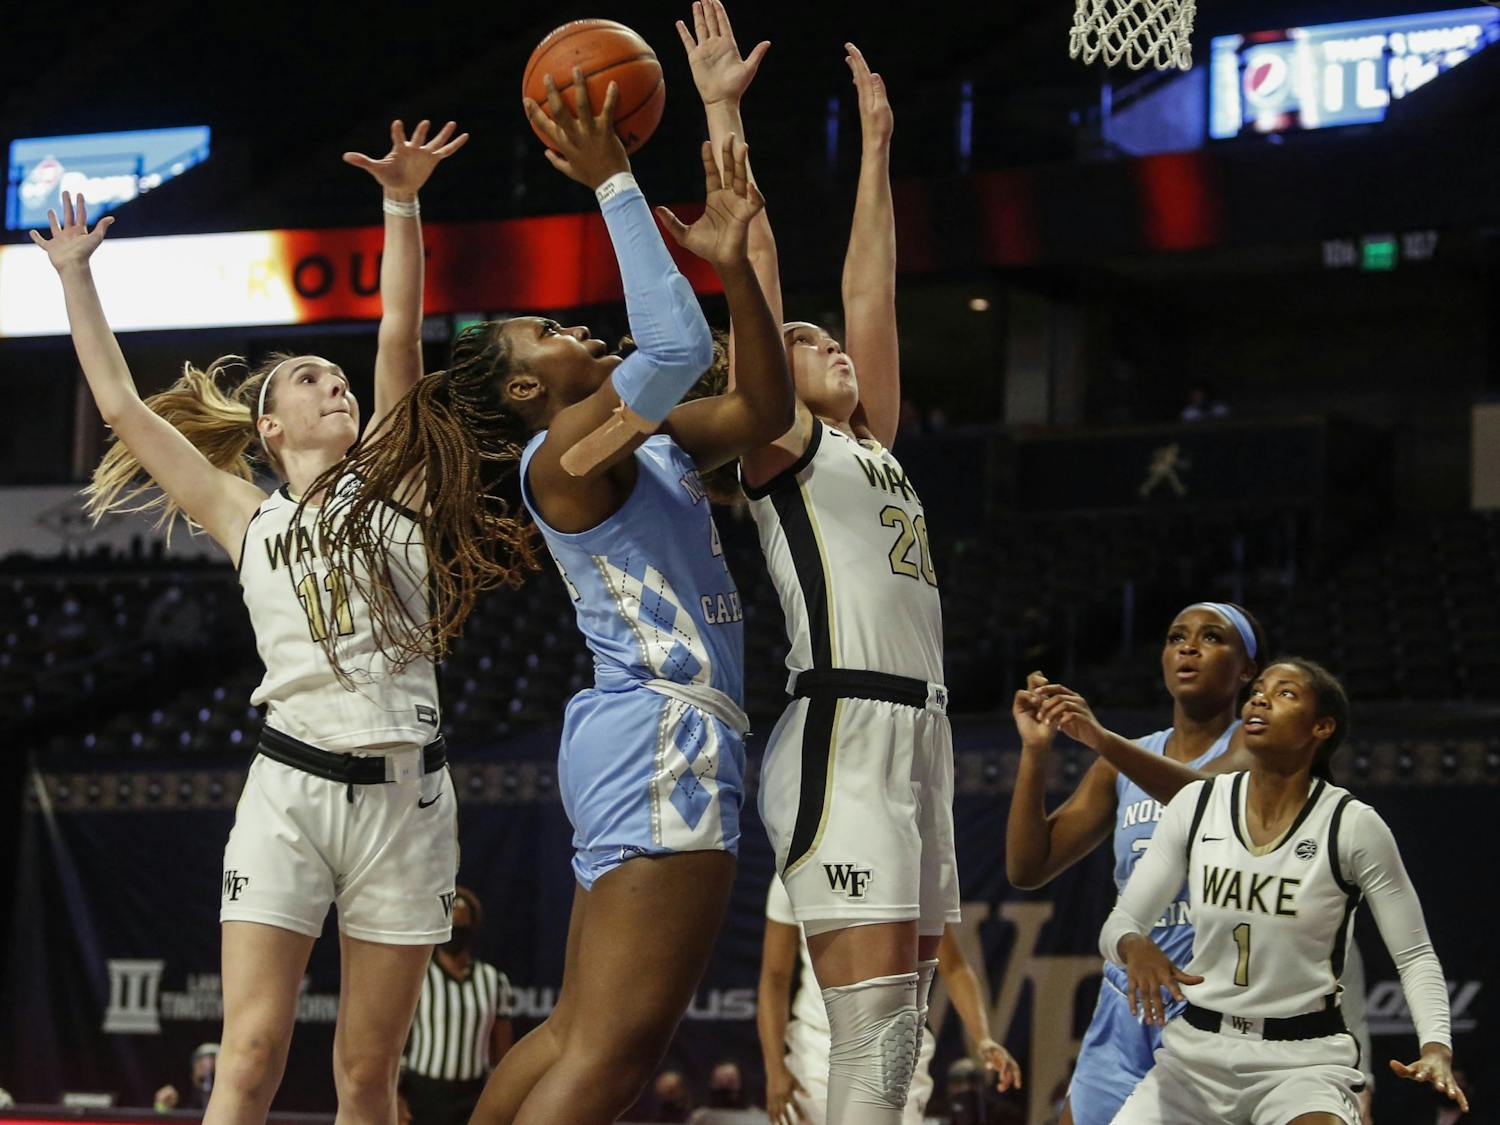 UNC senior center Janelle Bailey (44) attempts to make a basket during a game against Wake Forest on Thursday, Nov. 10, 2020. UNC fell to Wake Forest 57-54. Photo courtesy of UNC Athletic Communications